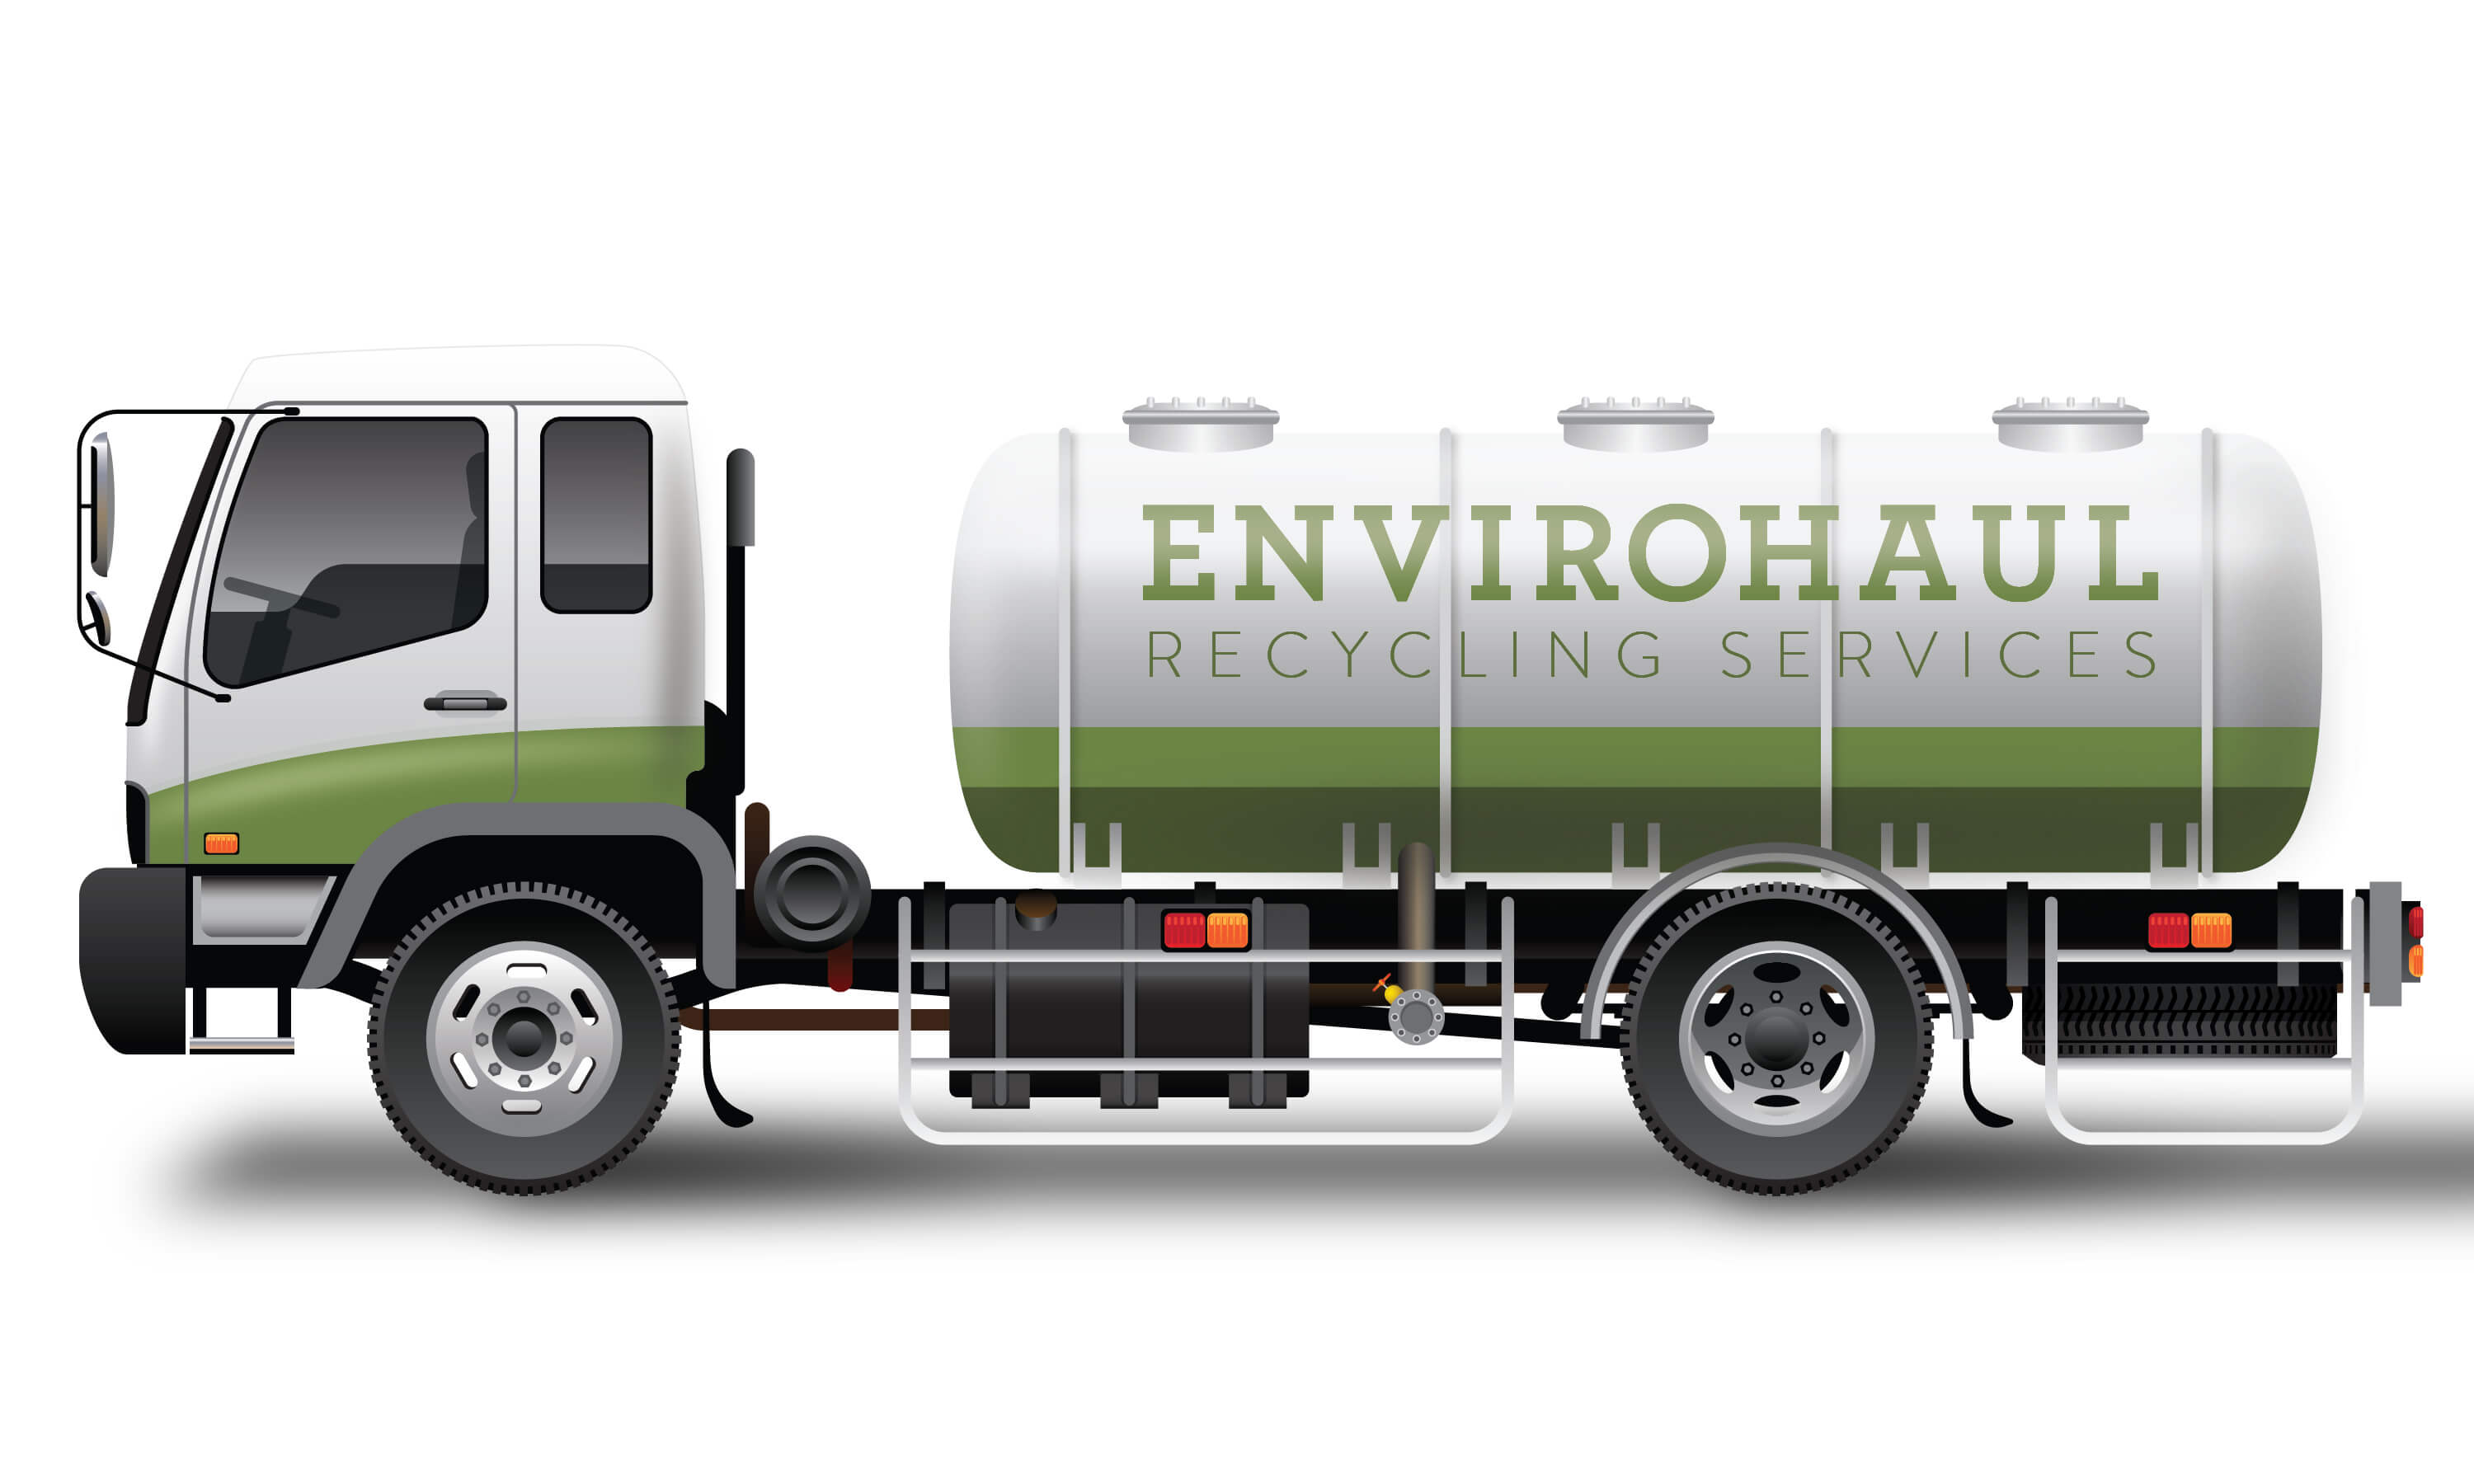 tank trailer with envirohaul recycling services written on the side